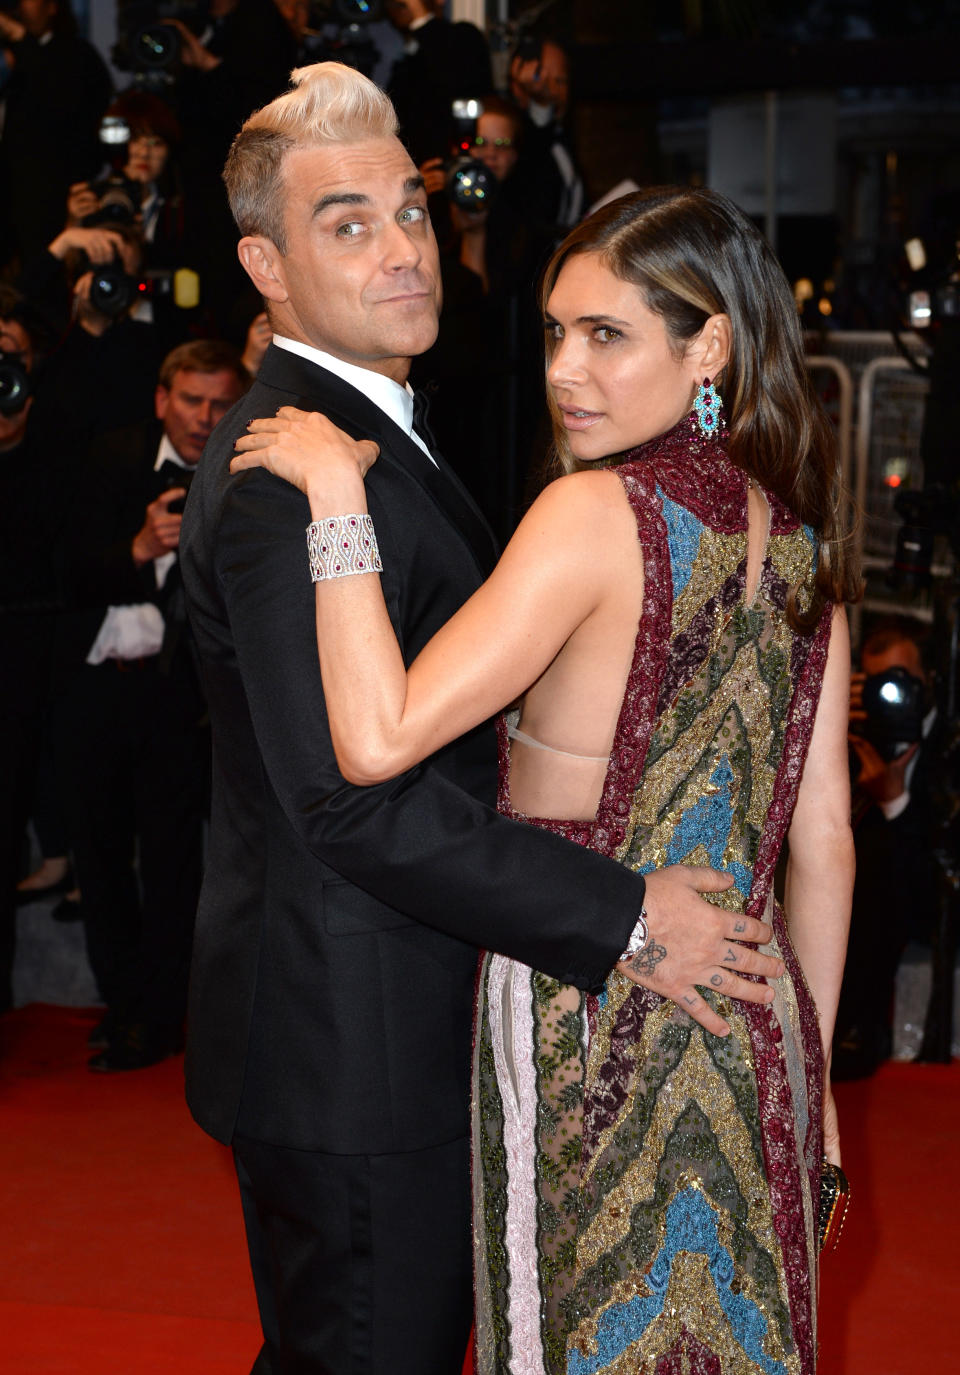 Robbie Williams and wife Ayda Field attending the Sea of Trees premiere taking place during the 68th Festival de Cannes held at the Grand Theatre Lumiere, Palais des Festivals, Cannes, France

(Mandatory Credit: Doug Peters/EMPICS Entertainment)